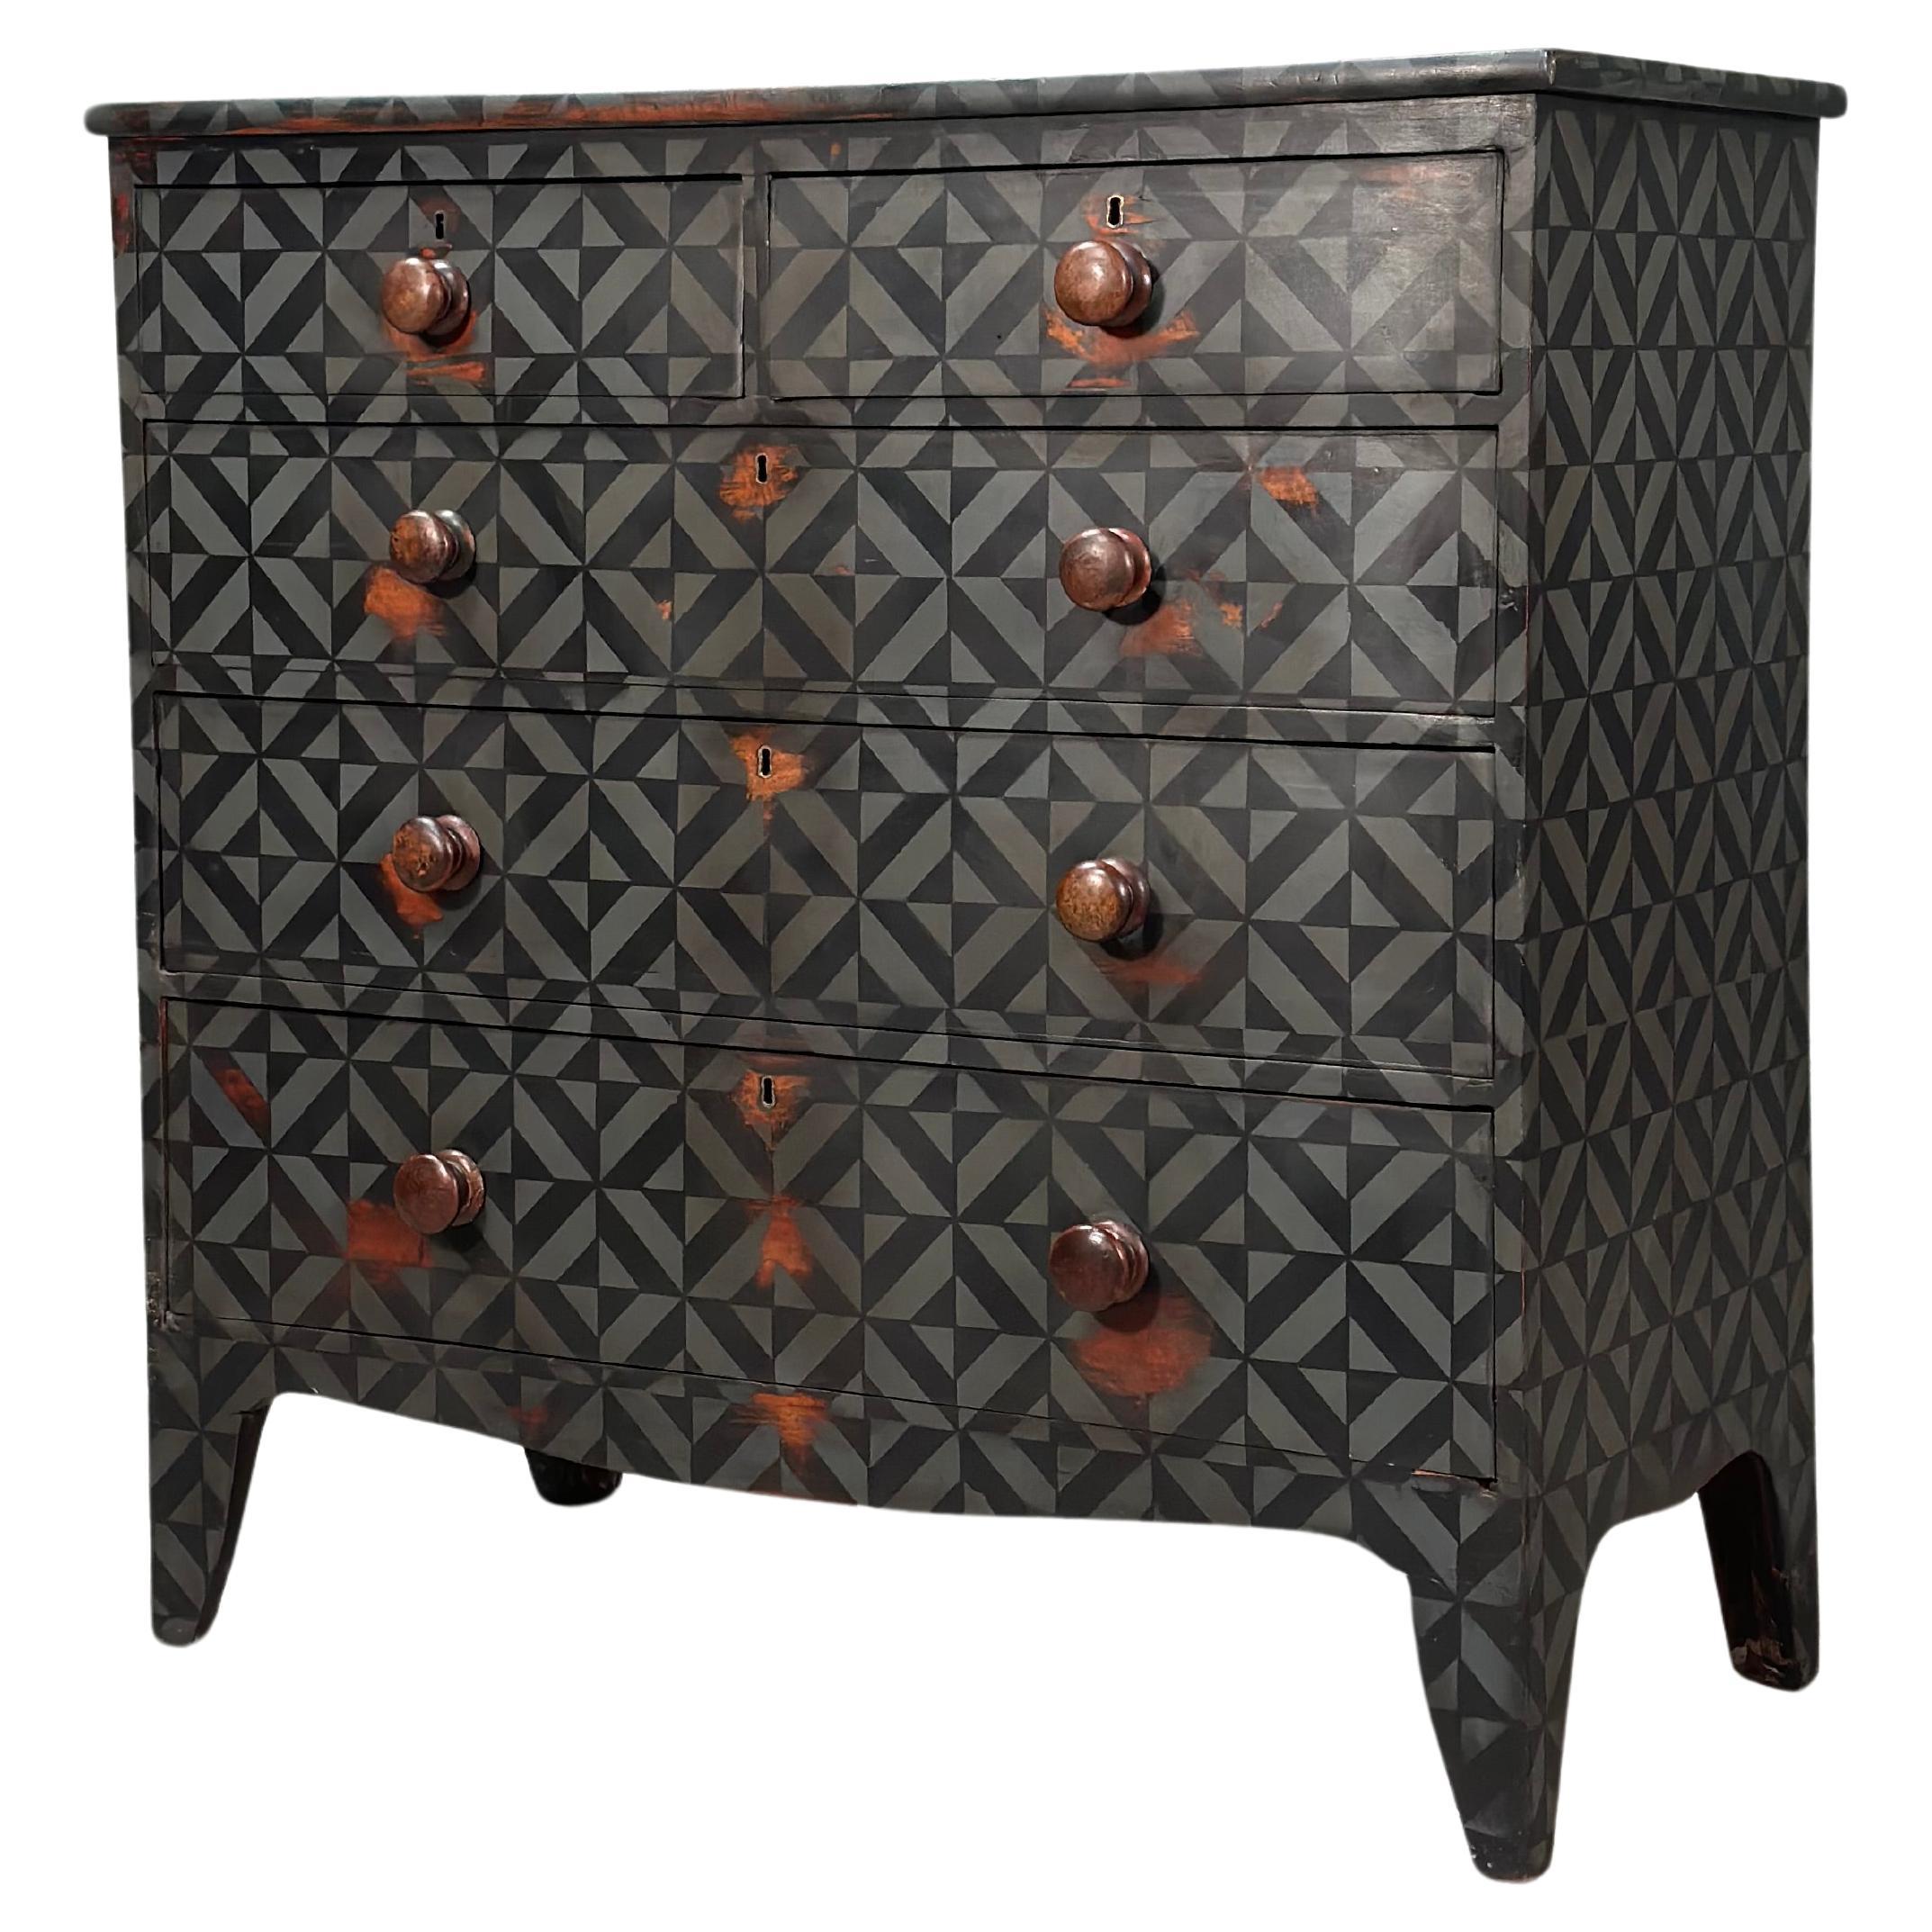 19th Century Geometric Painted Chest Of Drawers